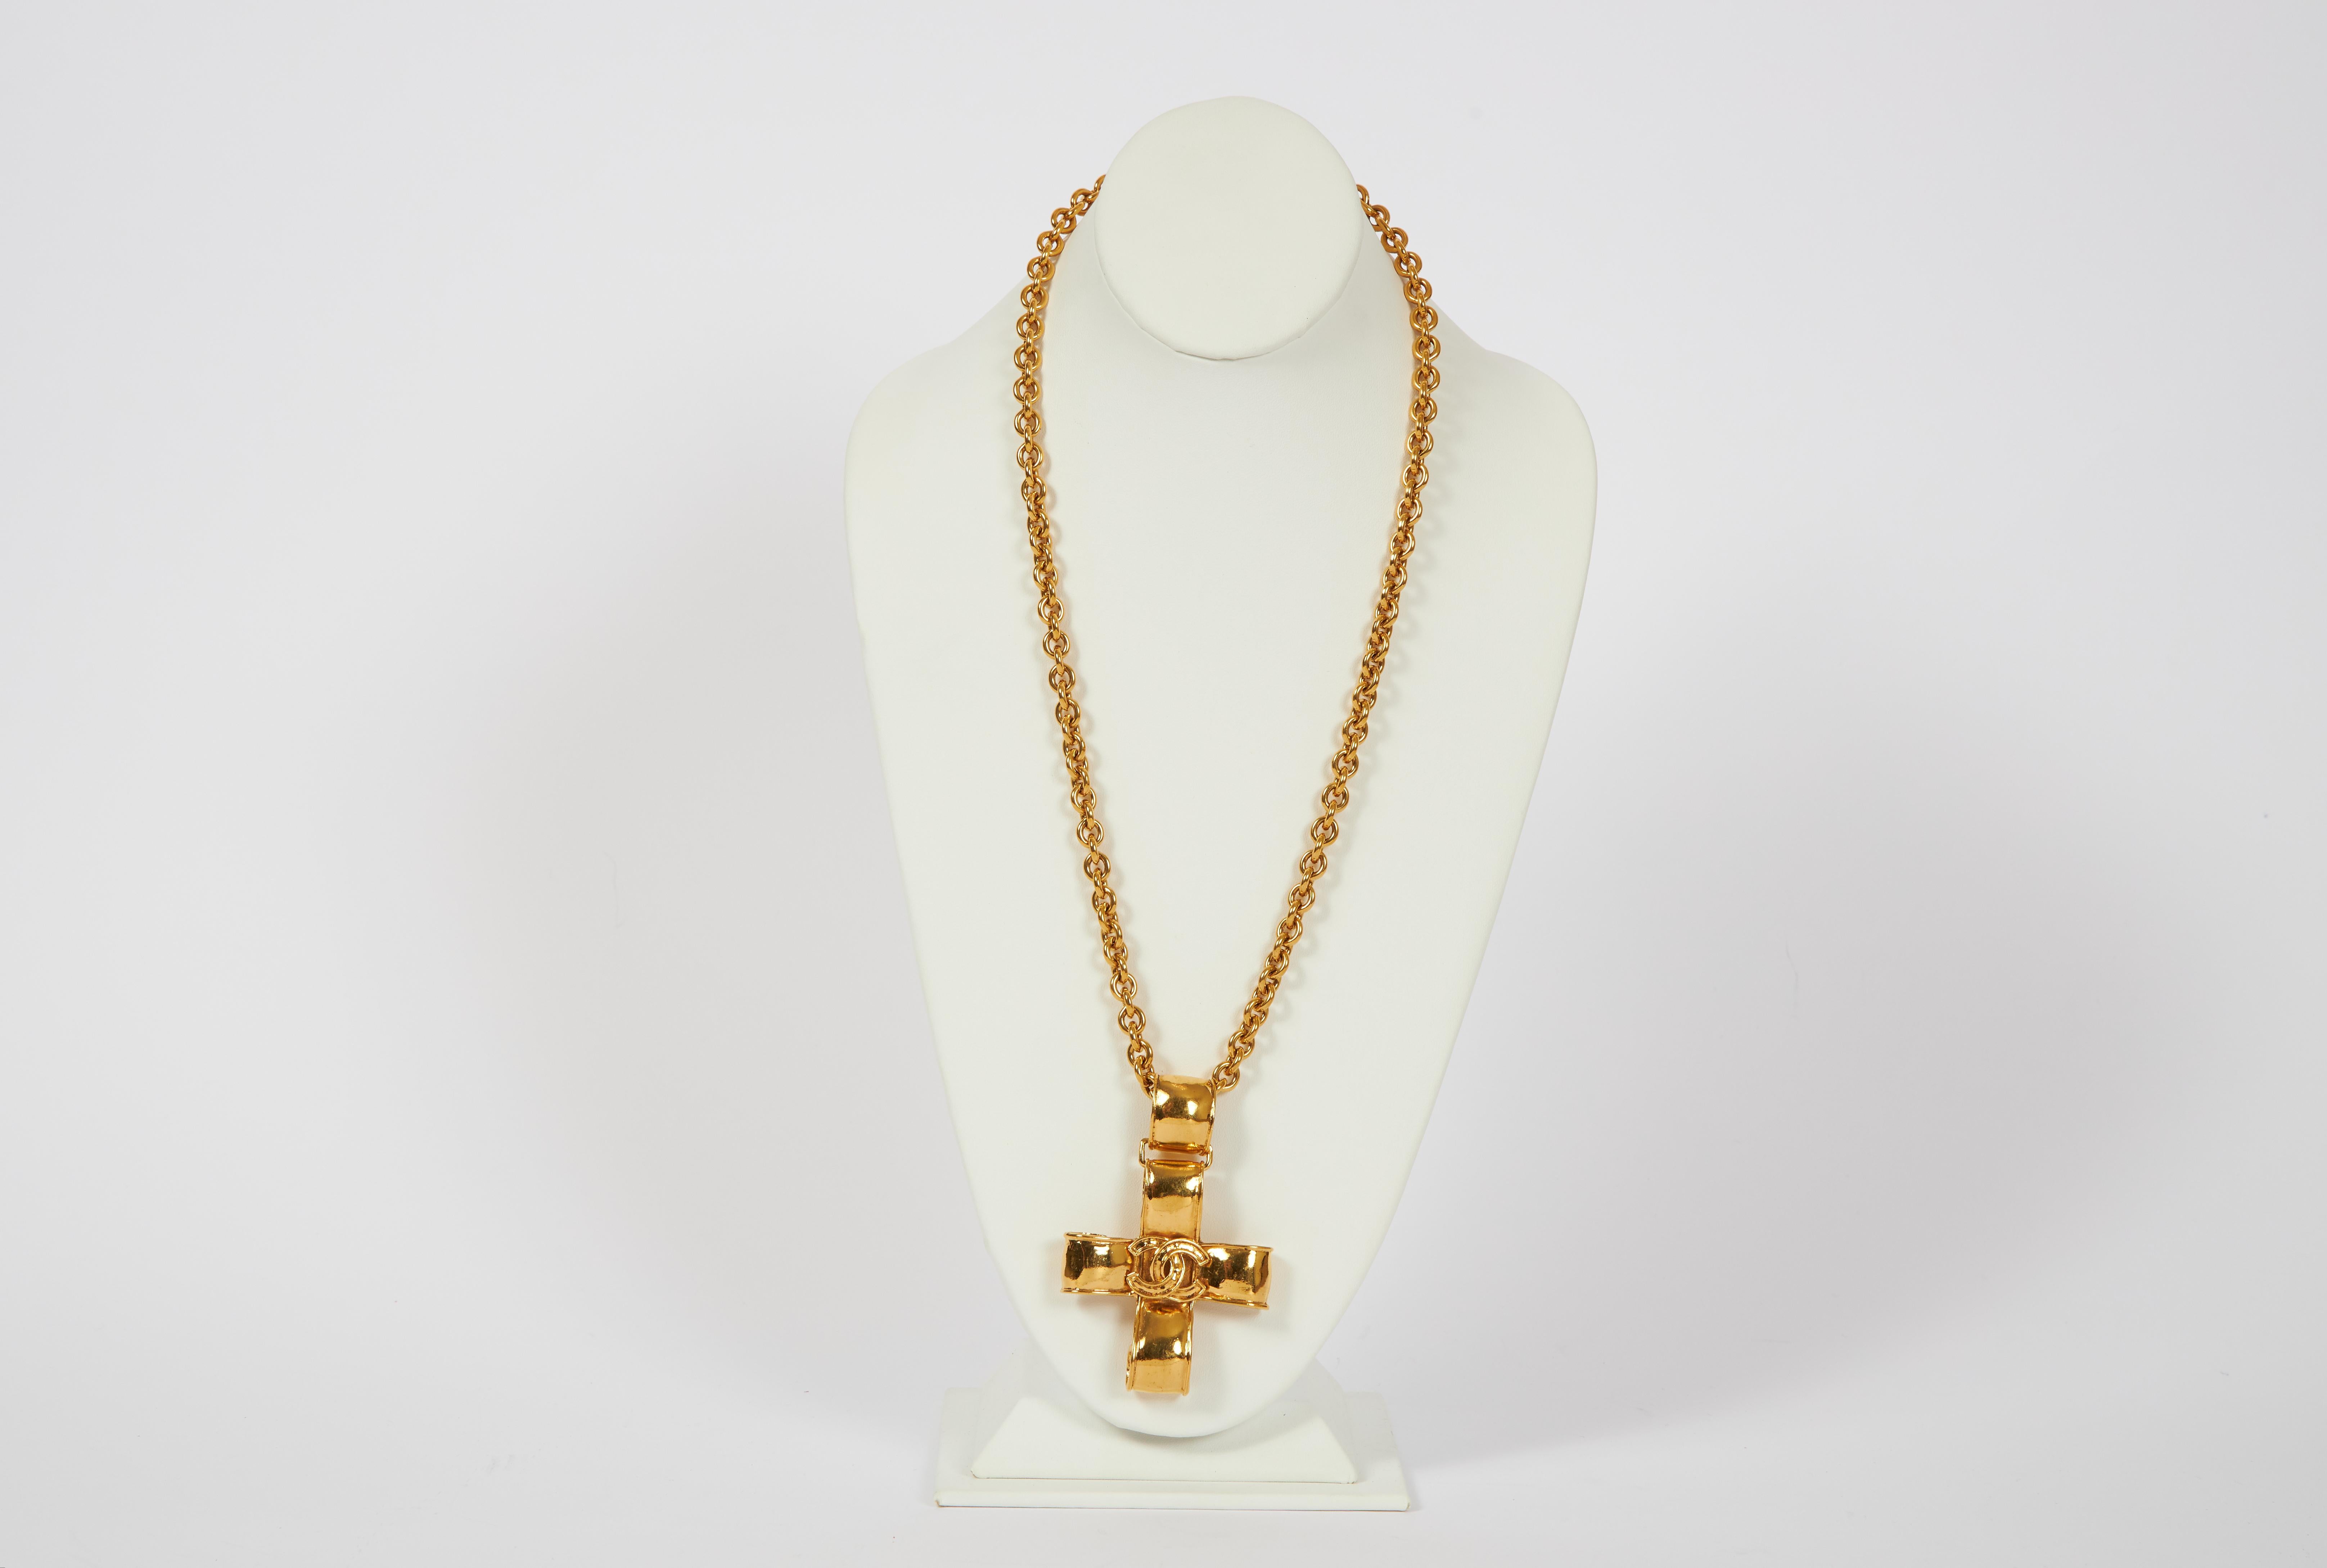 Chanel goldtone metal cross pendant necklace. Spring 1994 collection. Pendant: 3.5